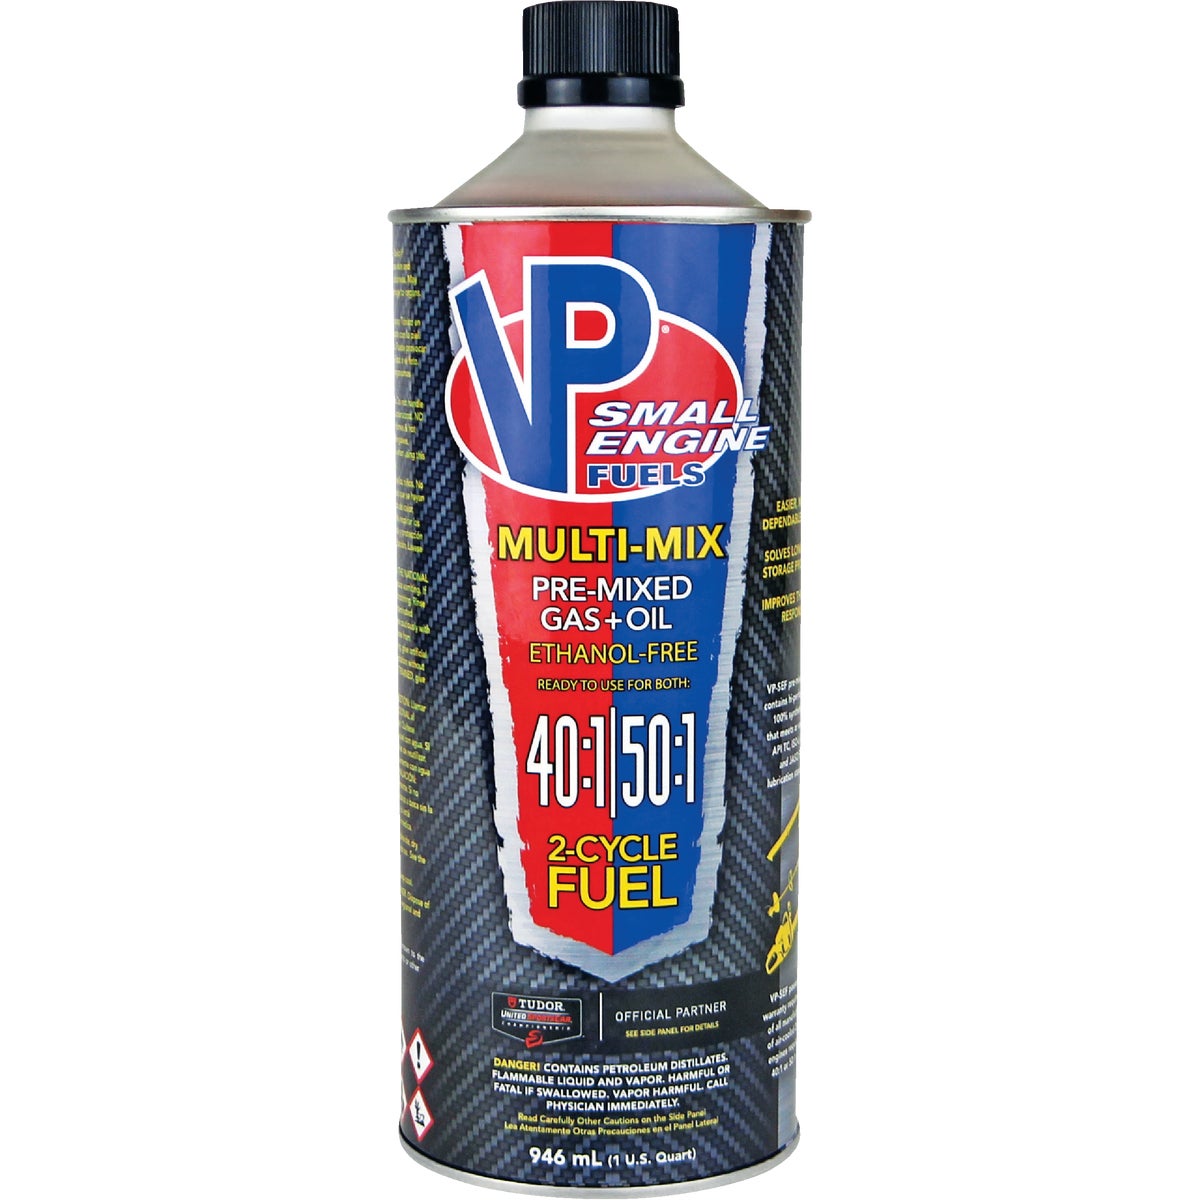 Item 705183, VP Racing Small Engine Fuels Ethanol Free Multi-Mix formula is mixed with 